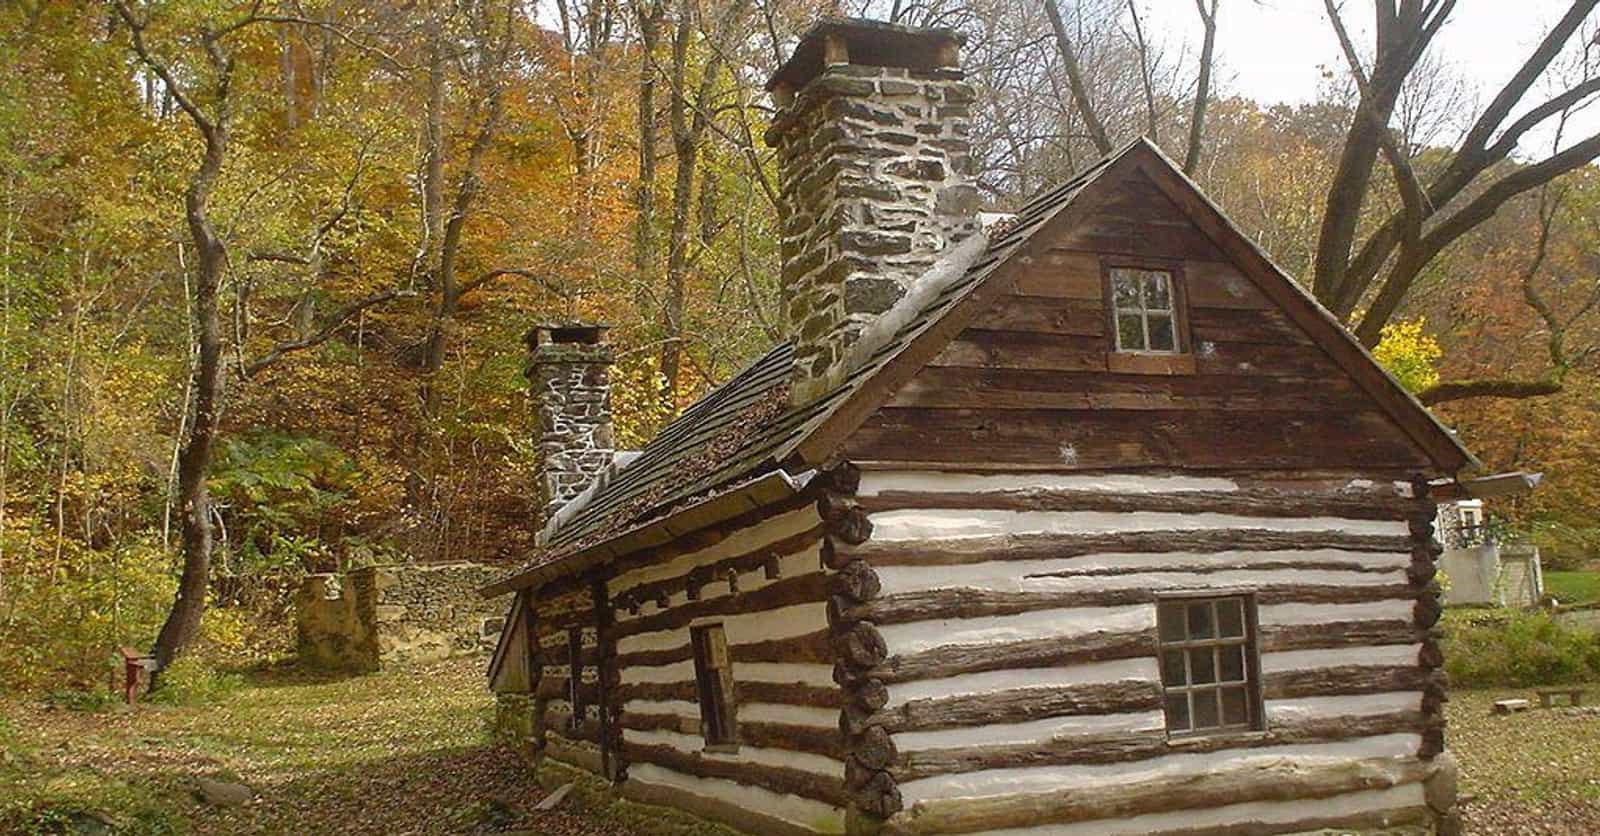 The Oldest Houses In The US That Are Still Standing